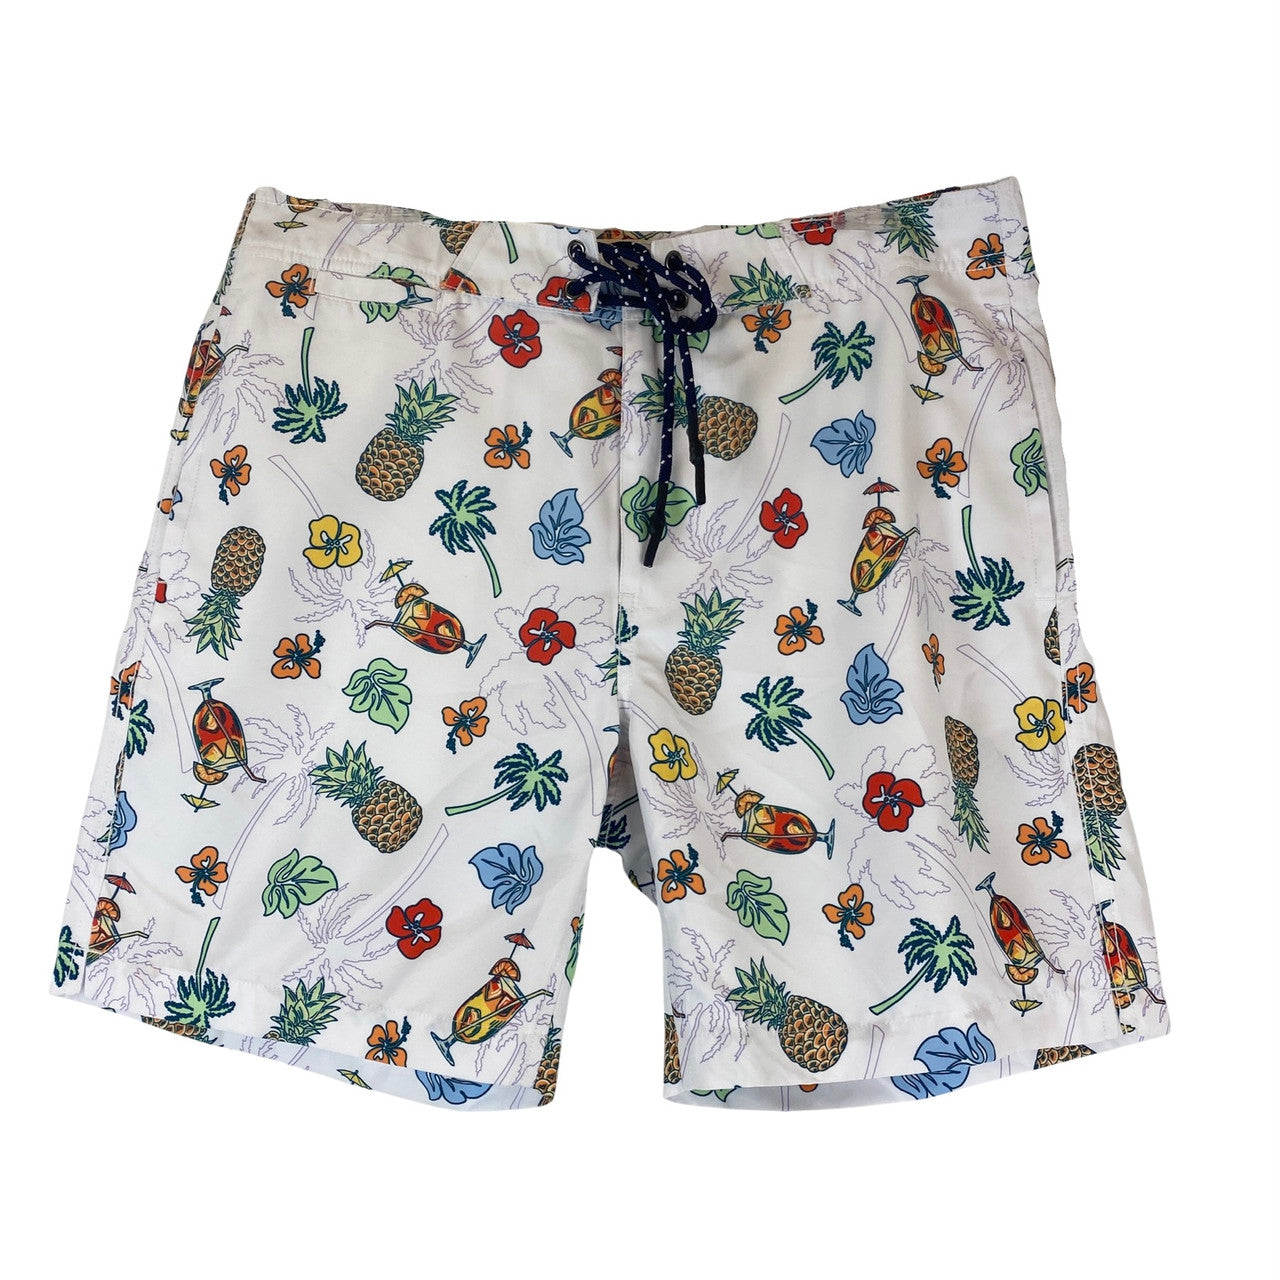 Surfside Supply Beach Cocktail Shirt And Short Set-Shorts front